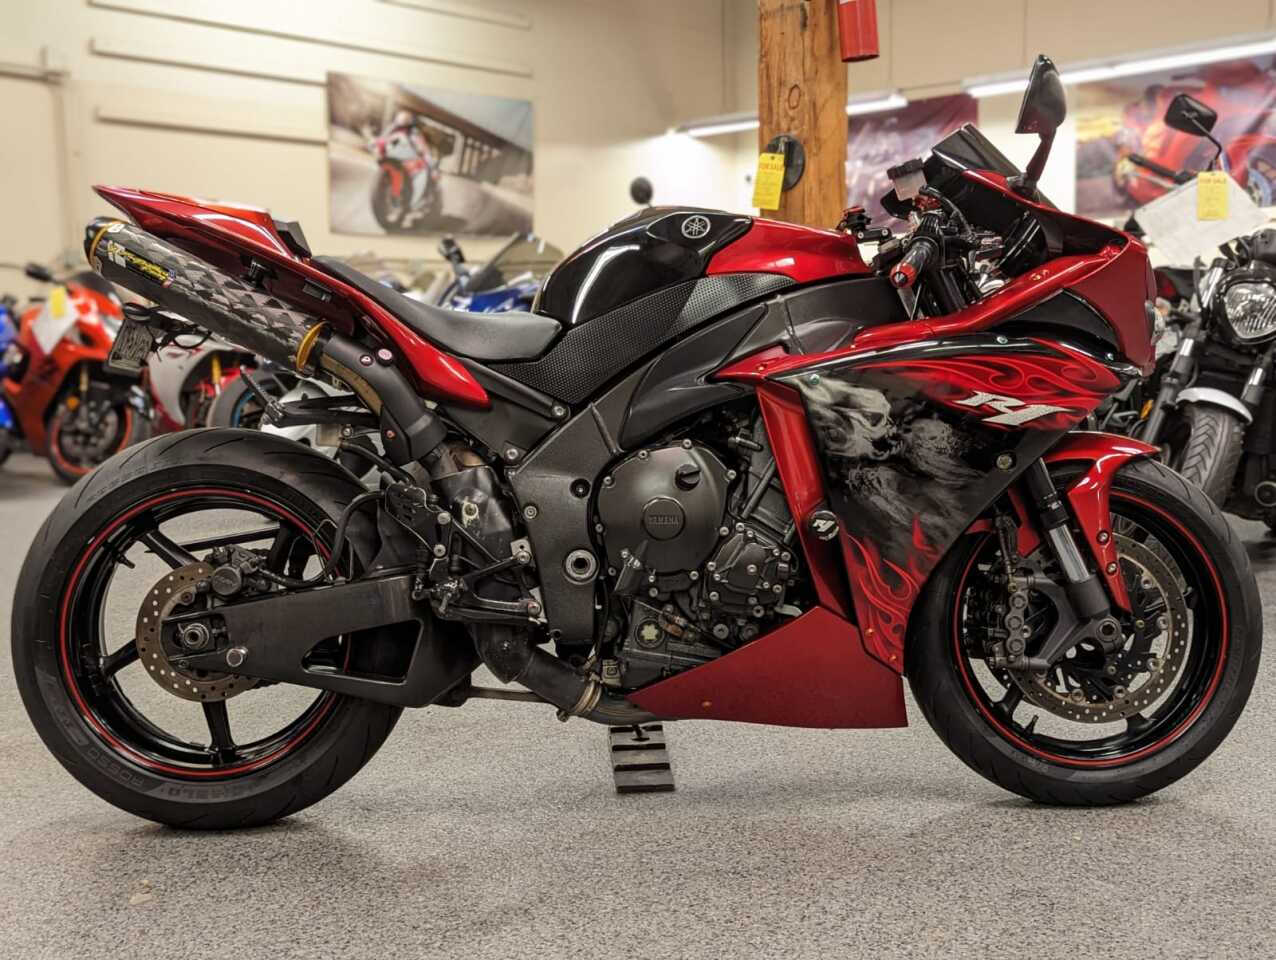 YZF-R1 For Sale - Carsforsale.com®